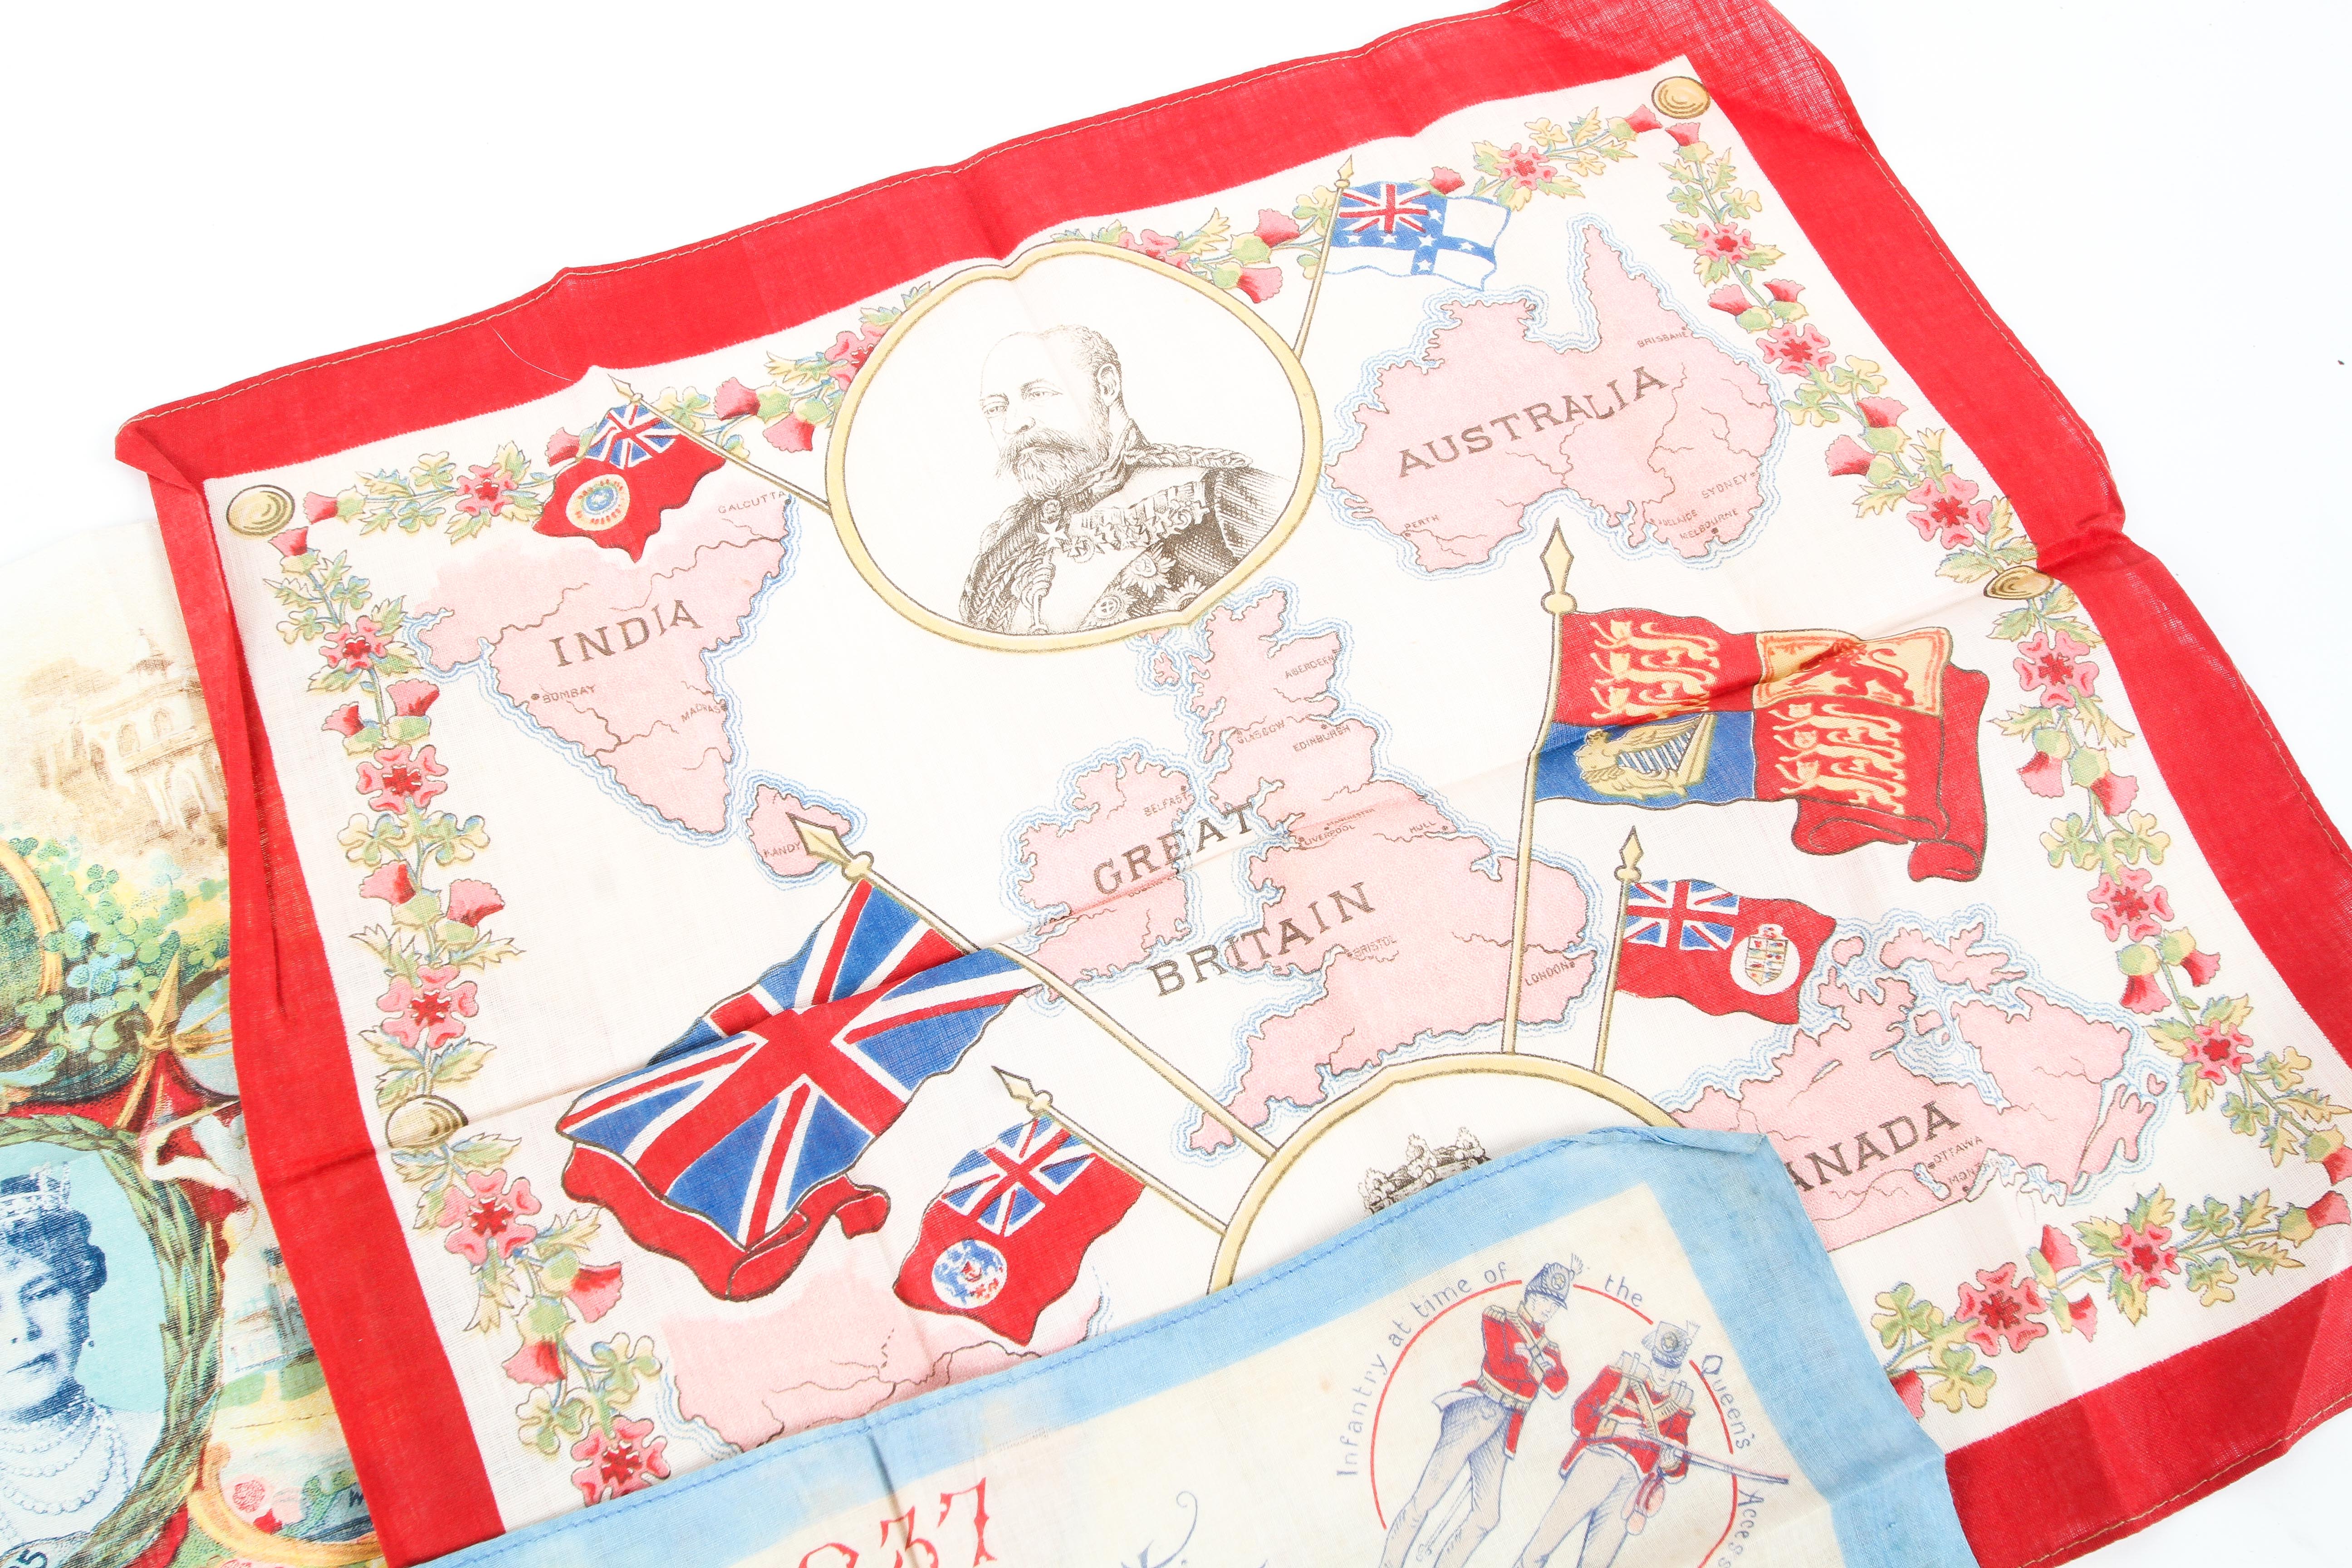 A collection of commemorative handkerchiefs. - Image 2 of 4